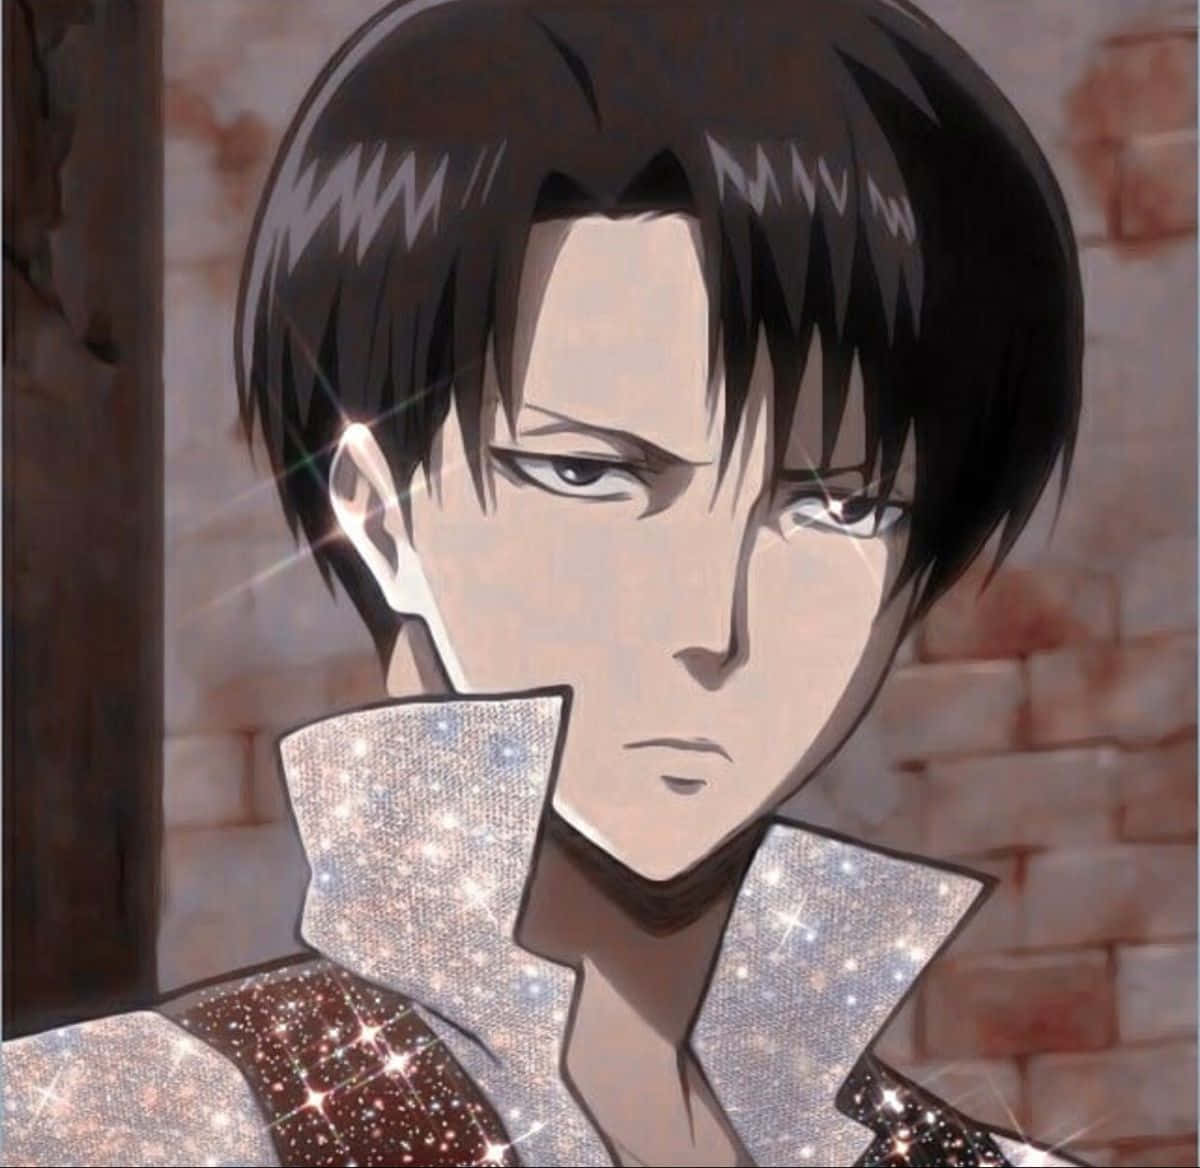 Captivating Animated Profile Picture of Levi Ackerman Wallpaper